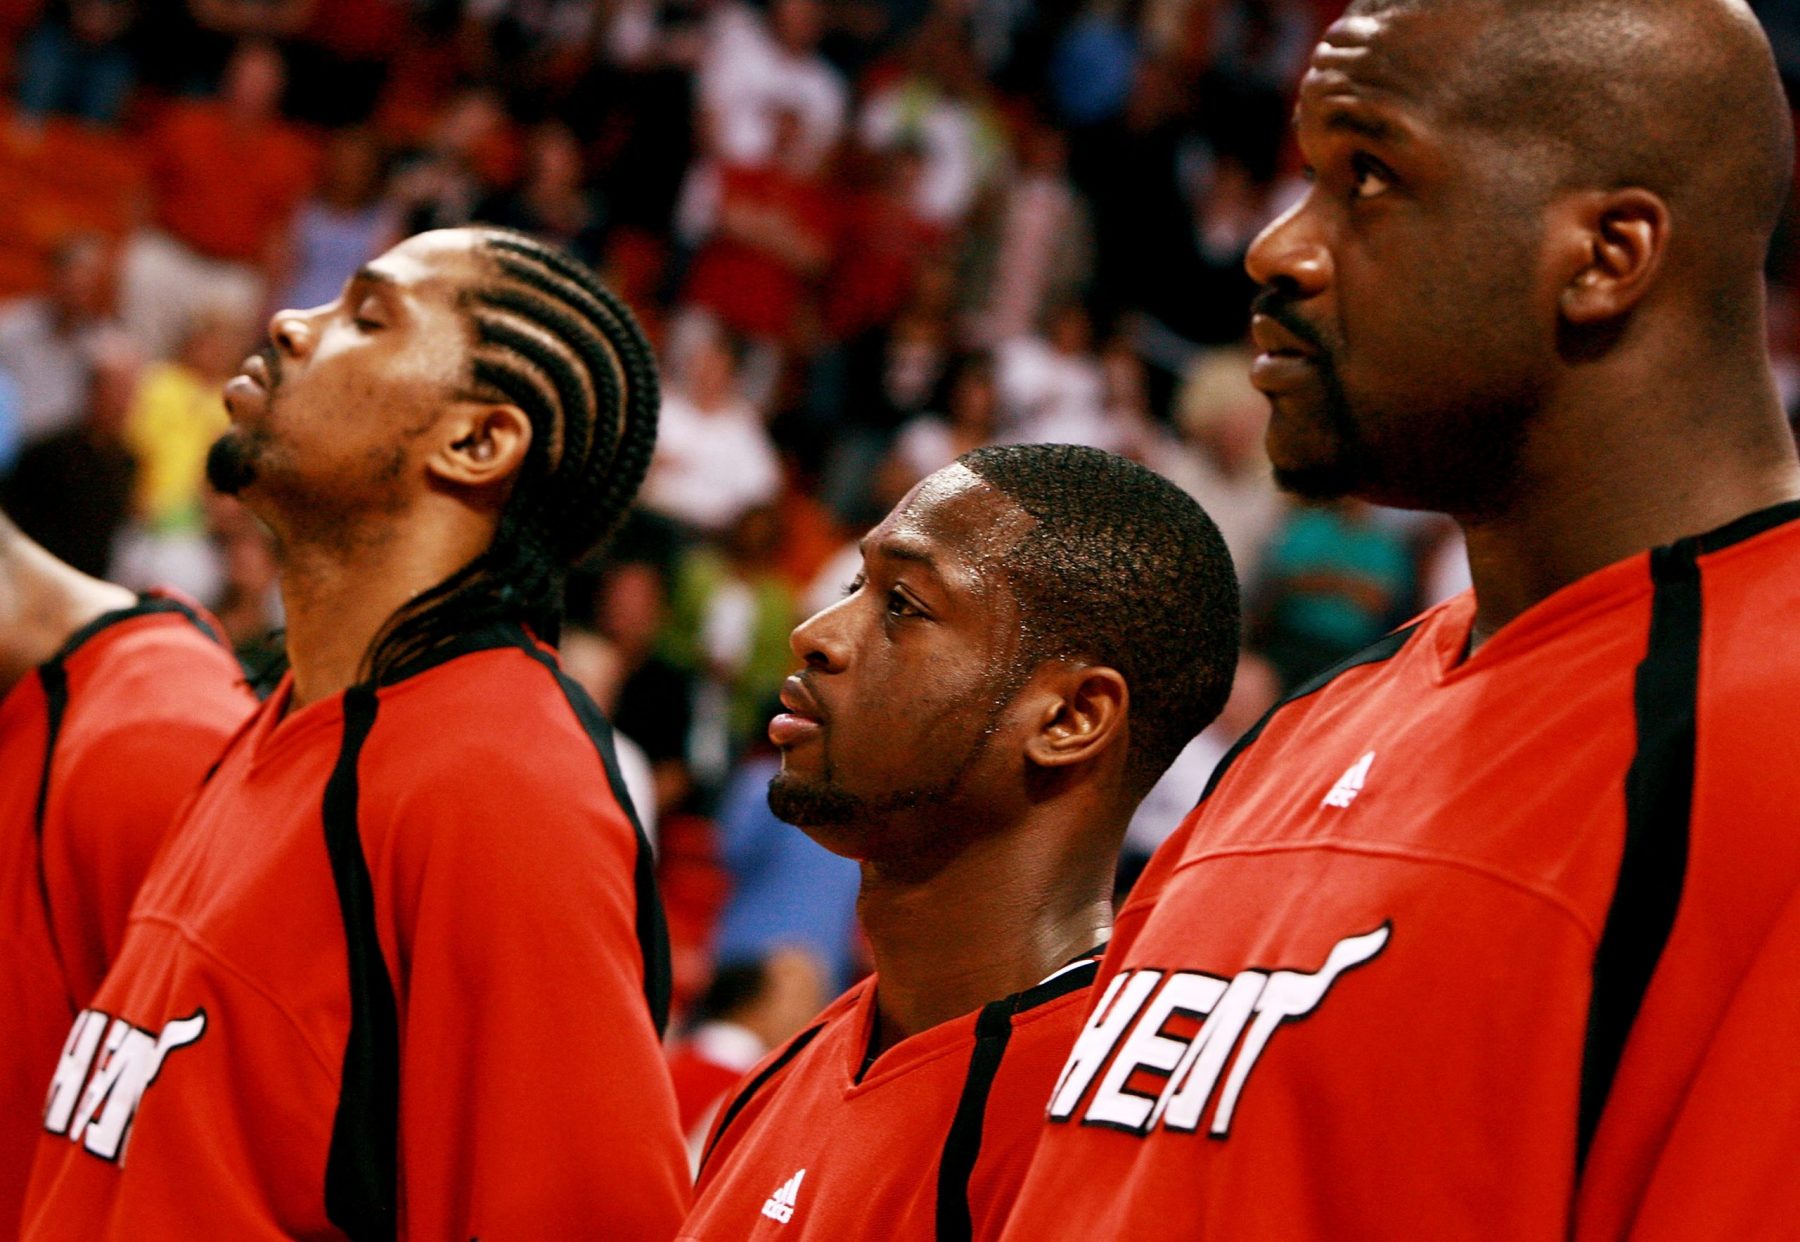 Udonis Haslem, Dwyane Wade and Shaquille O'Neal